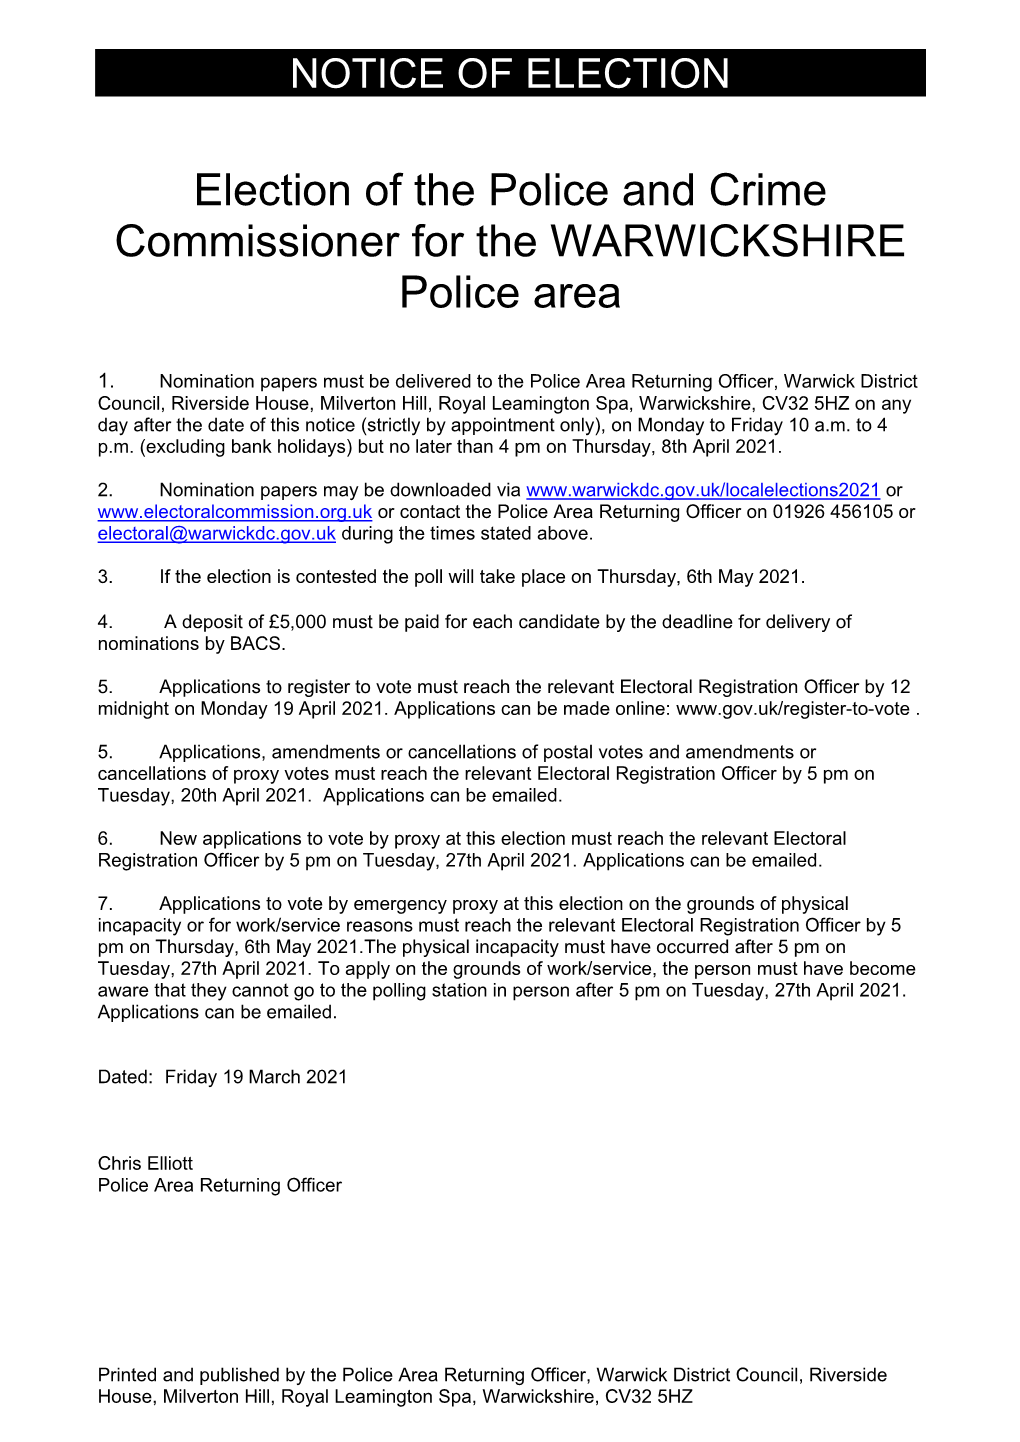 Election of the Police and Crime Commissioner for the WARWICKSHIRE Police Area